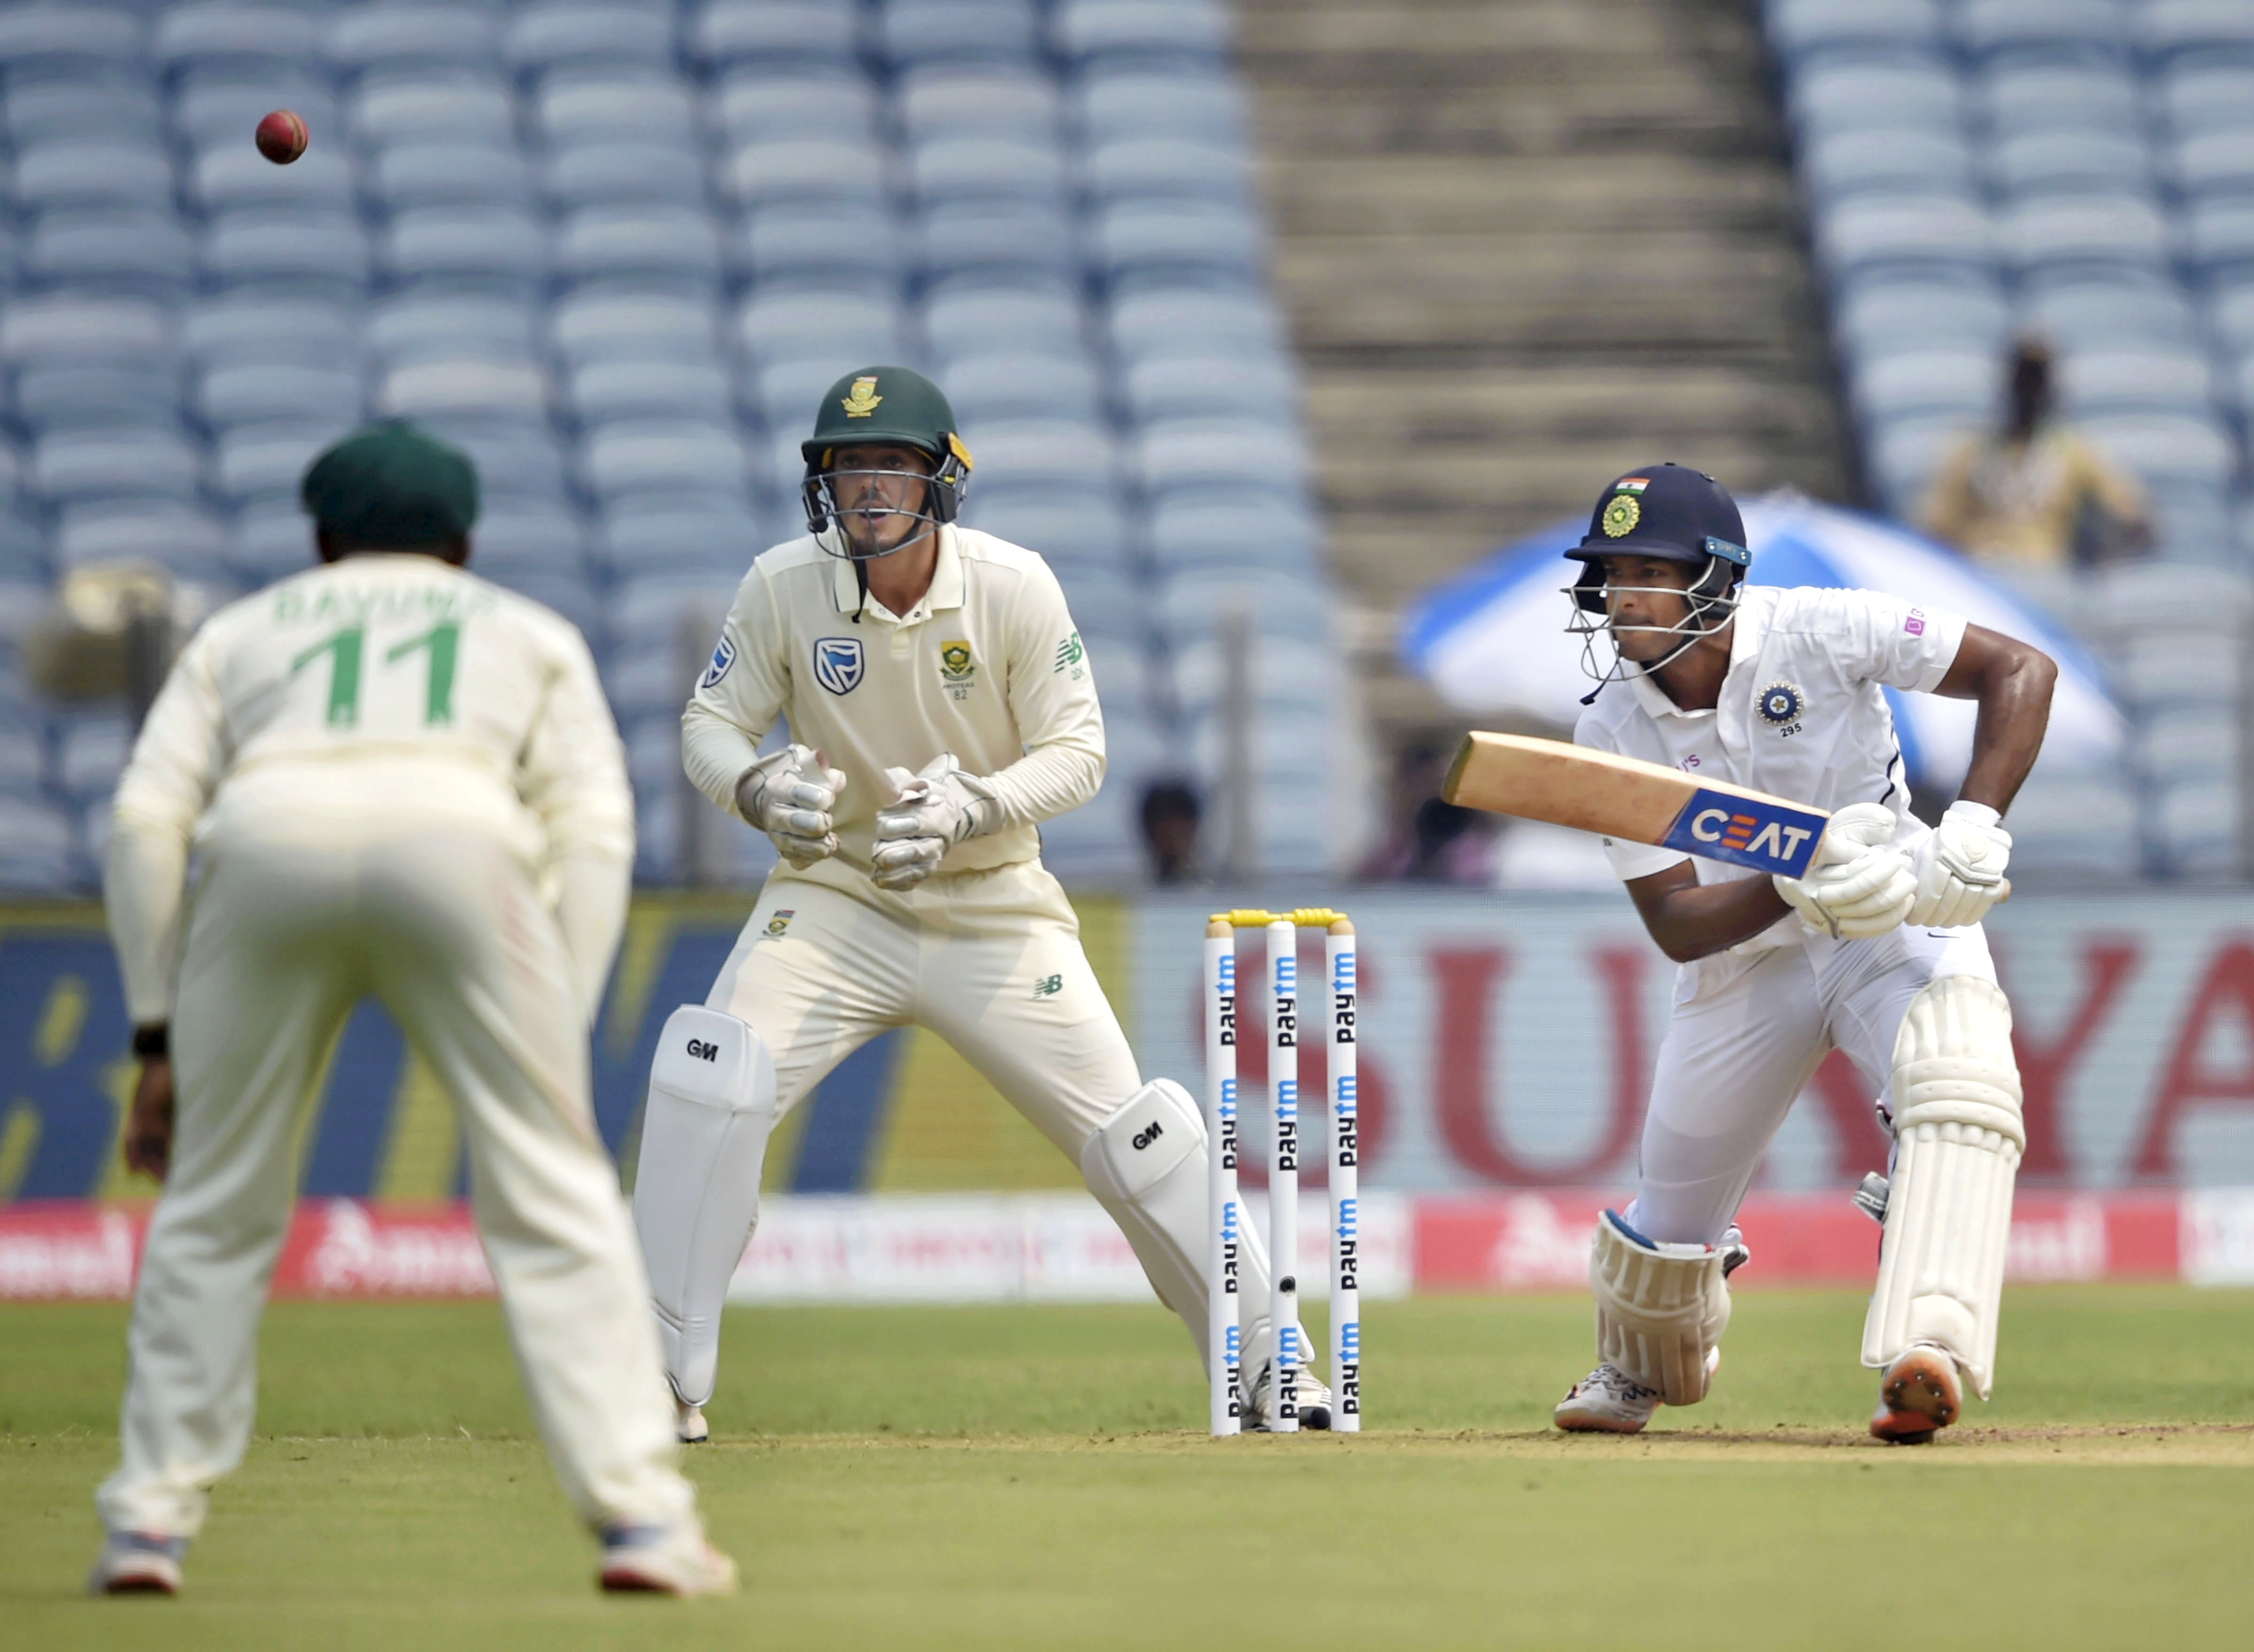 Indian cricketer Mayank Agarwal plays a shot during the second India-South Africa cricket test match - PTI